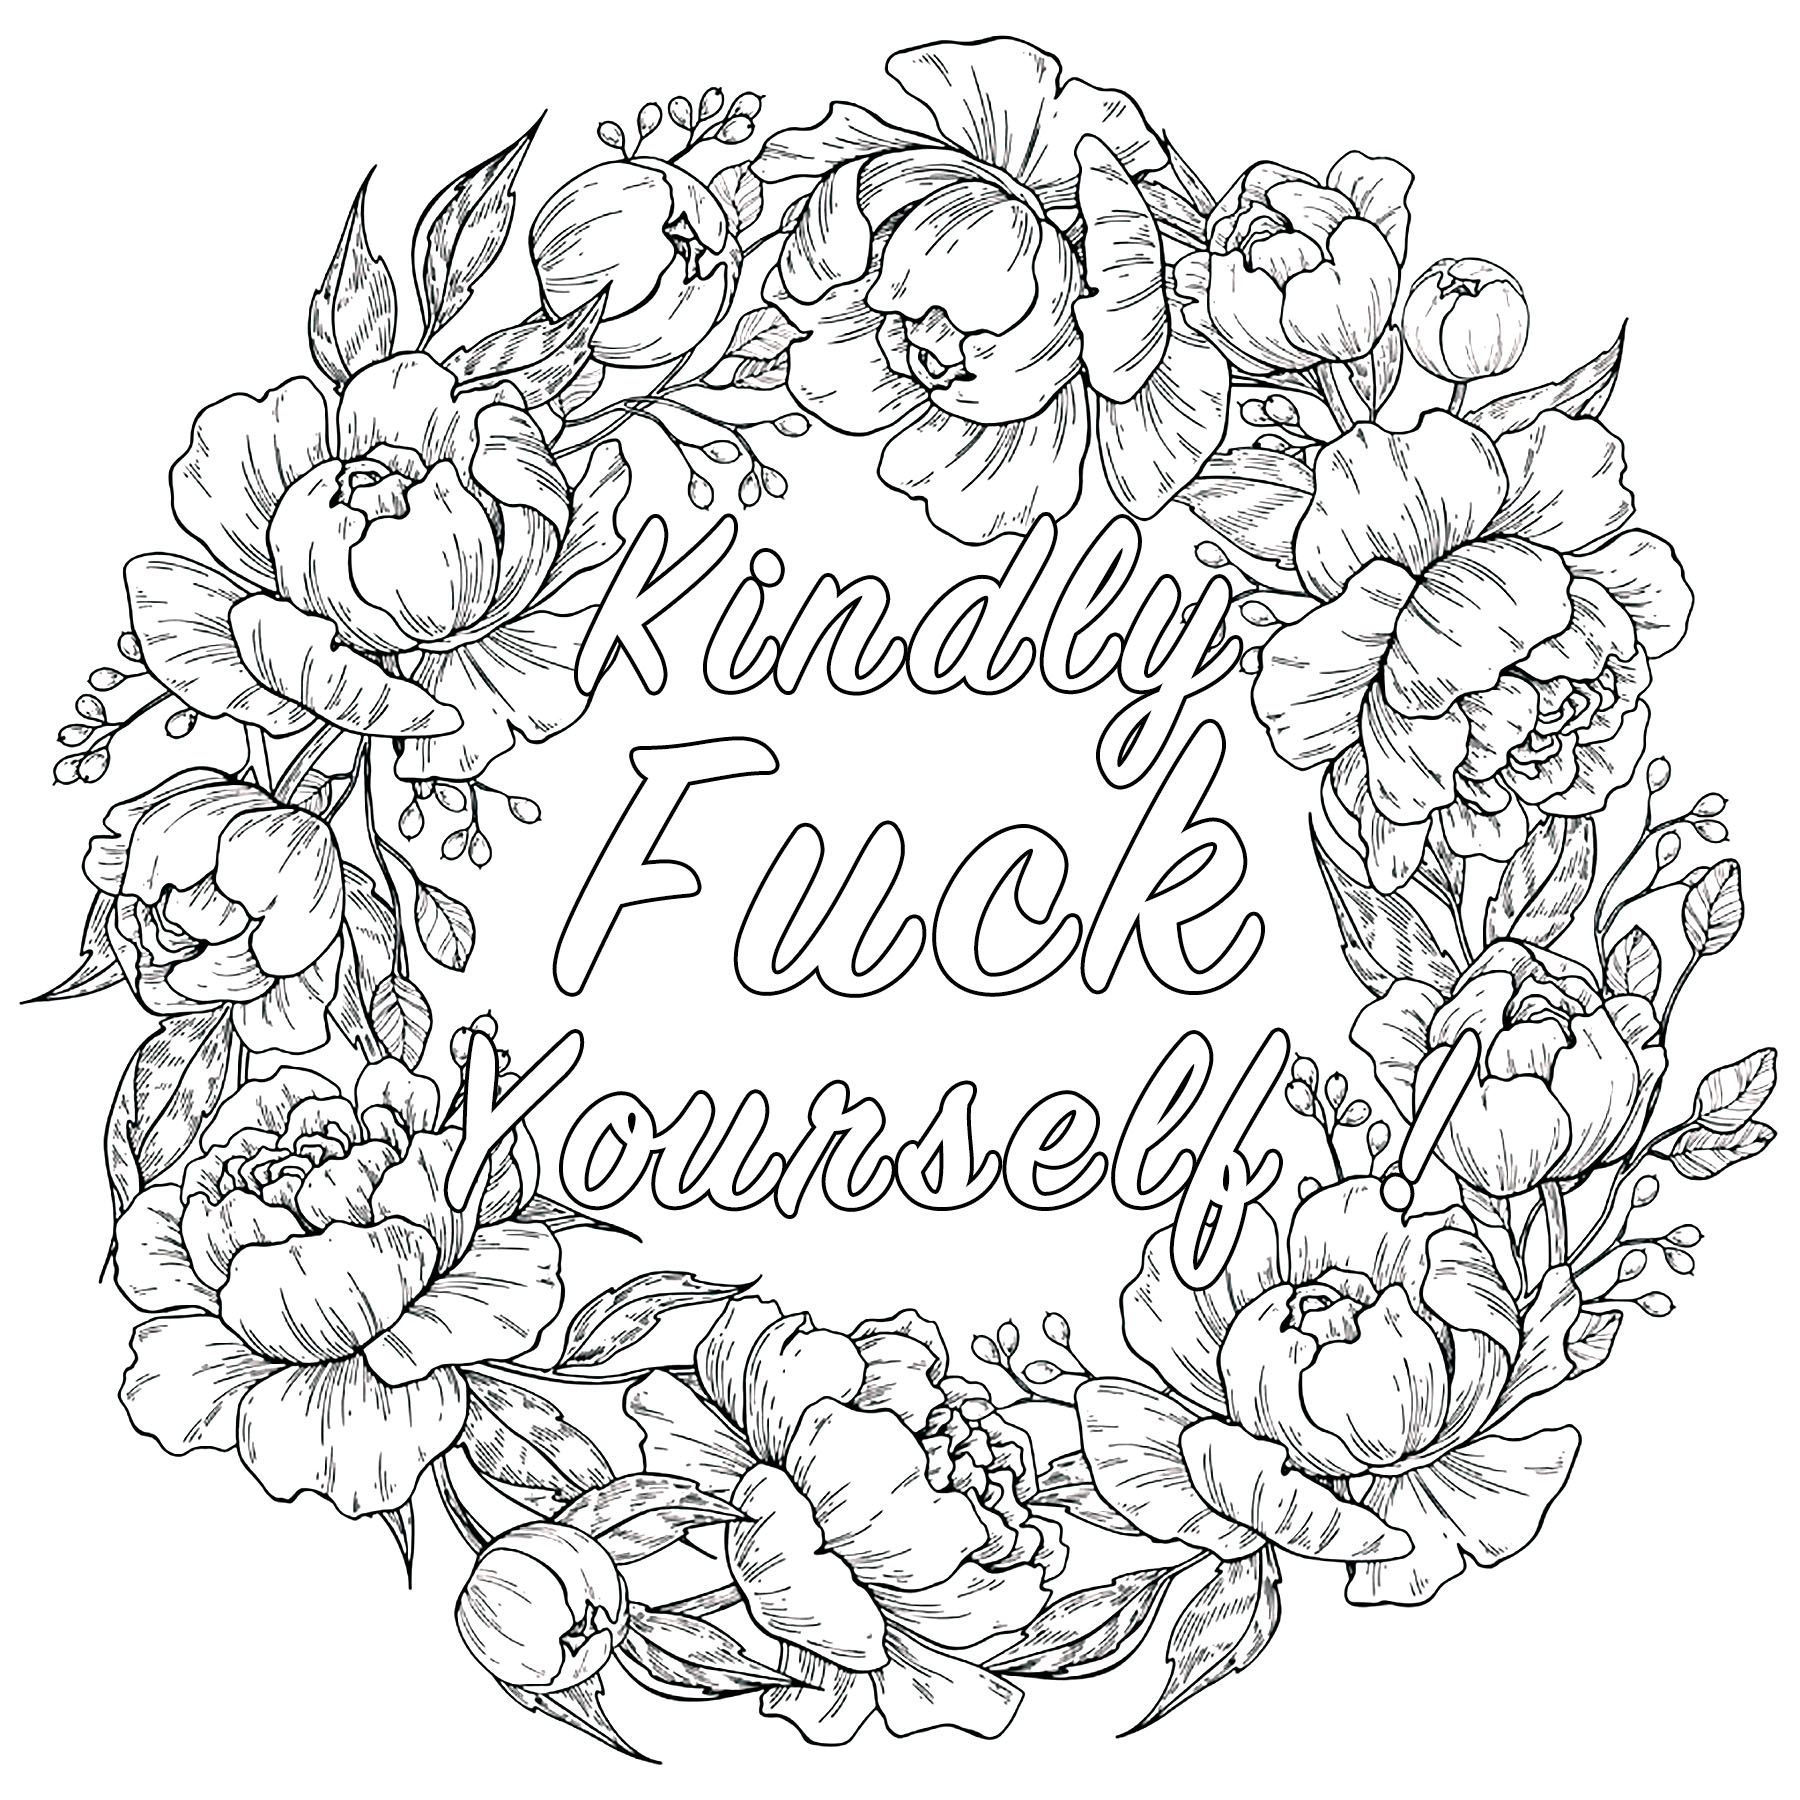 Download Kindly Fuck Yourself Swear Word Coloring Page Swear Word Adult Coloring Pages